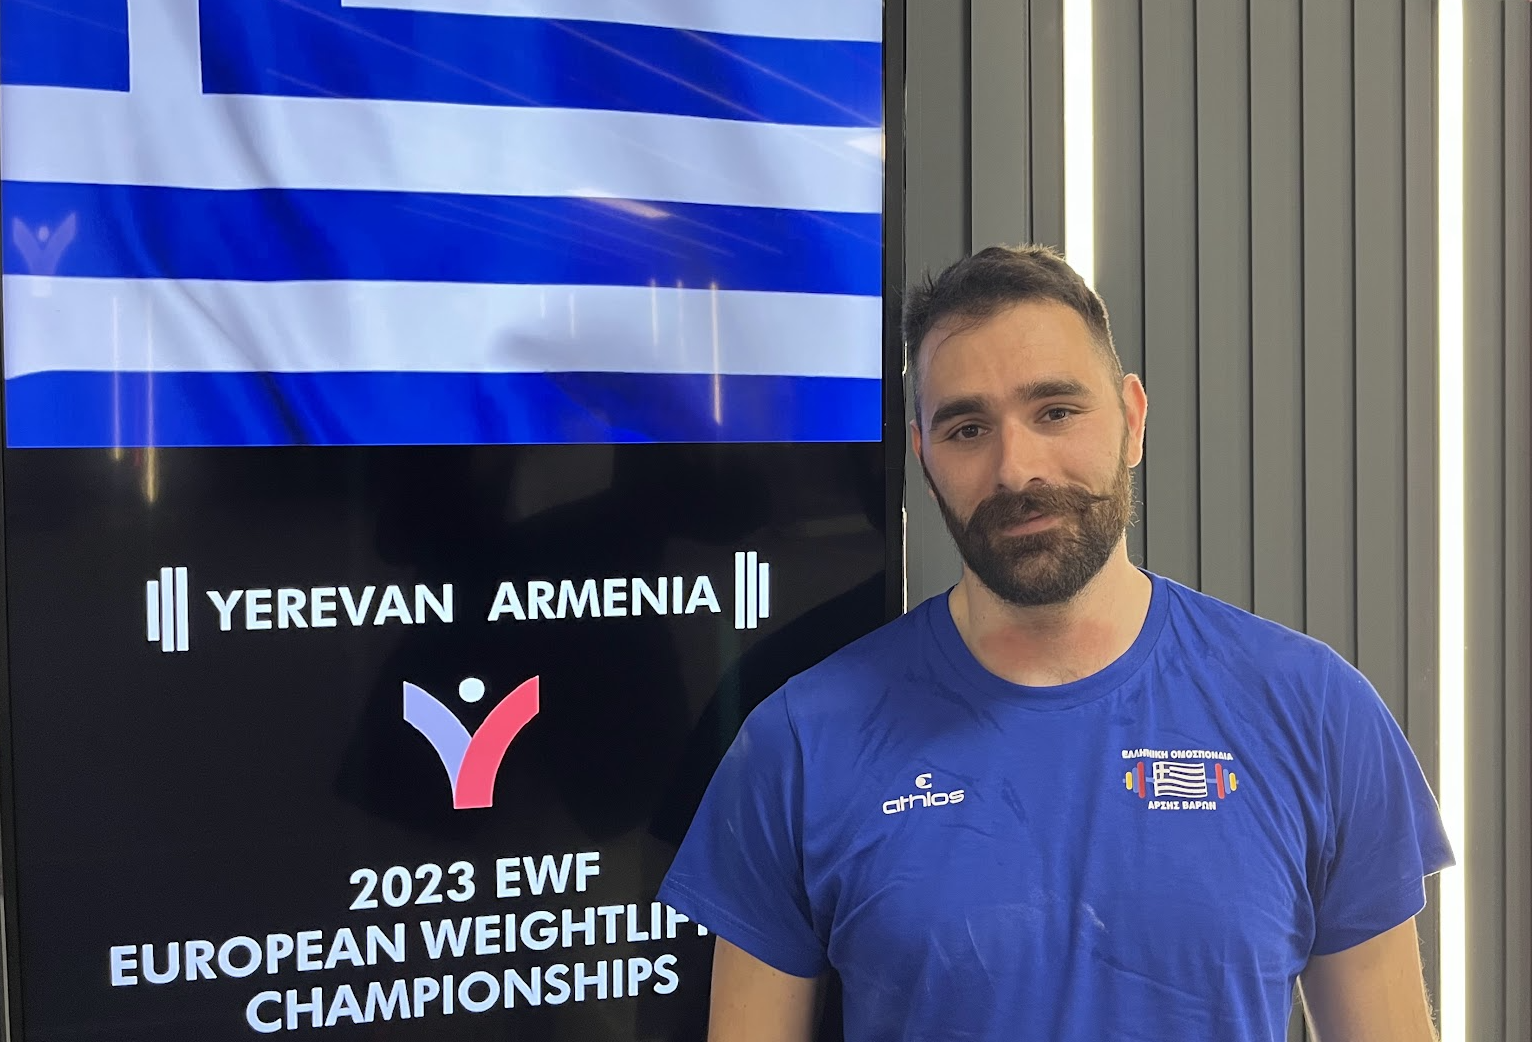 Theodoros Iakovidis has been competing in Yerevan as part of his quest to qualify for Paris 2024 ©Brian Oliver